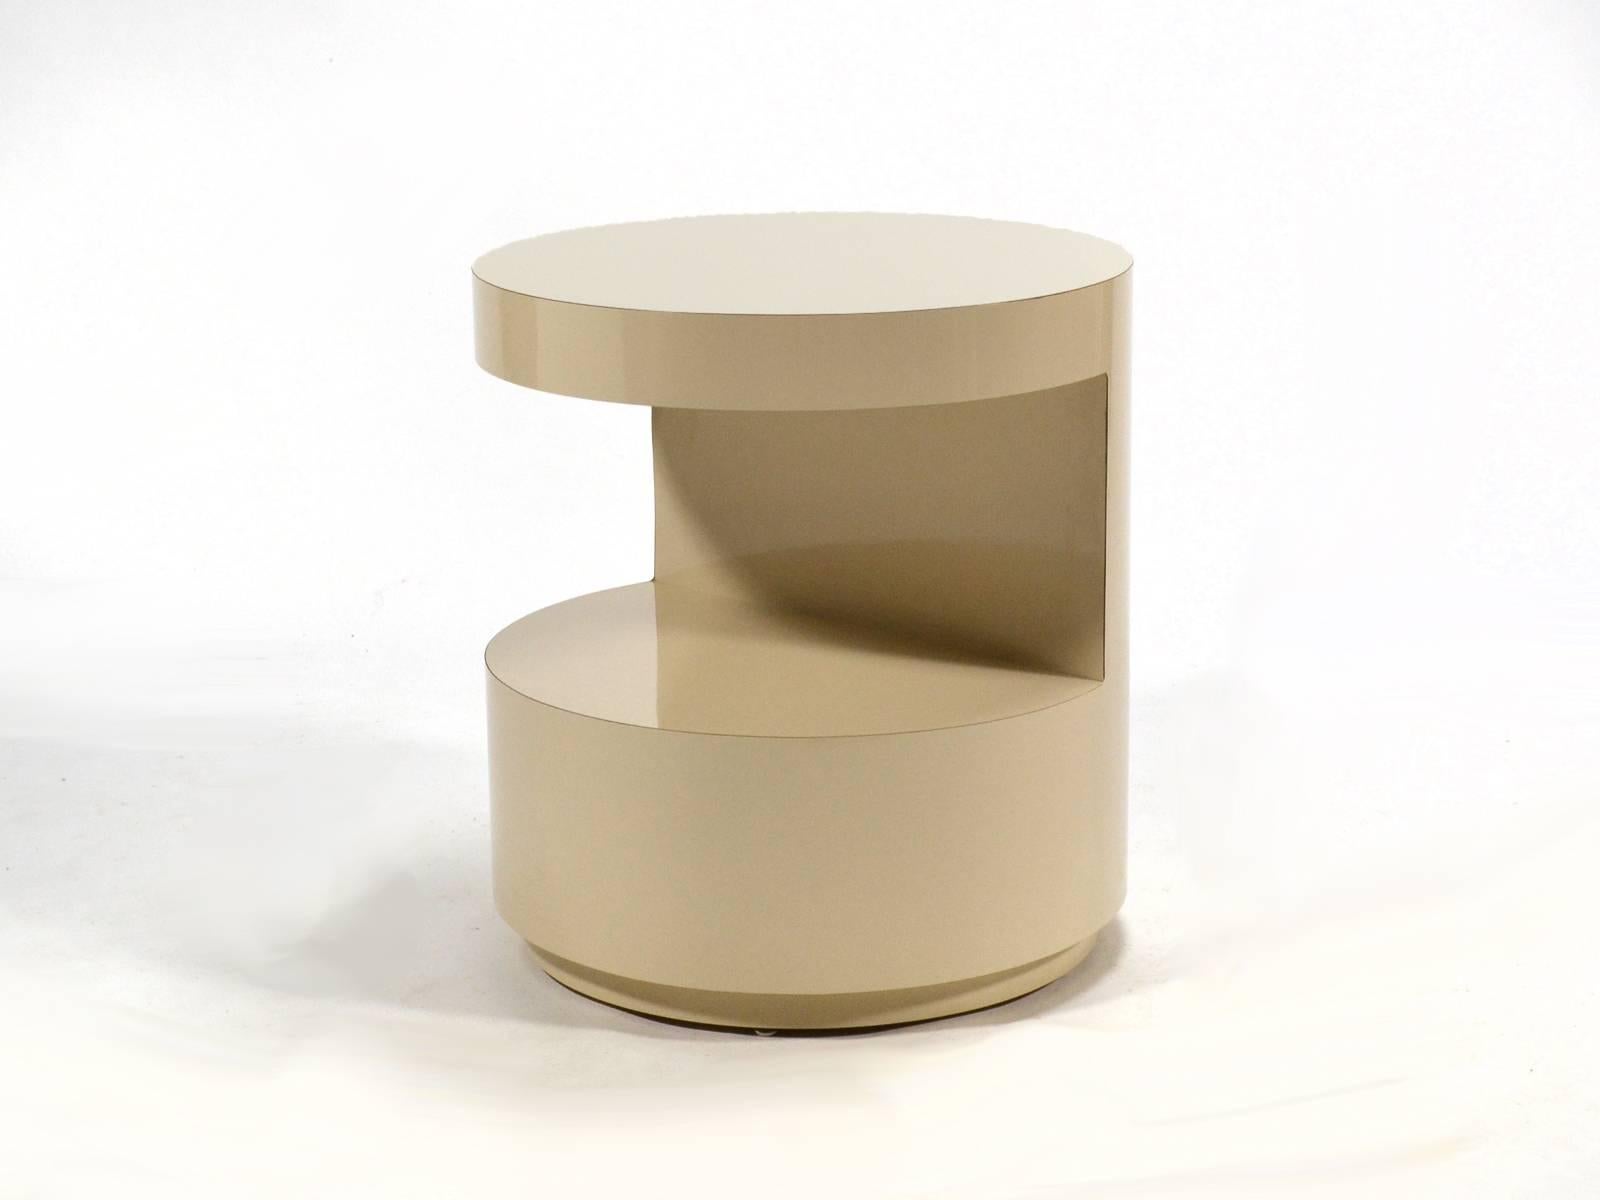 This side table by noted Chicago interior designer David Russ is a cylindrical form with a cut-away on one side creating a shelf below the cantilevered top. The inset plinth base gives the substantial shape a lighter footprint.